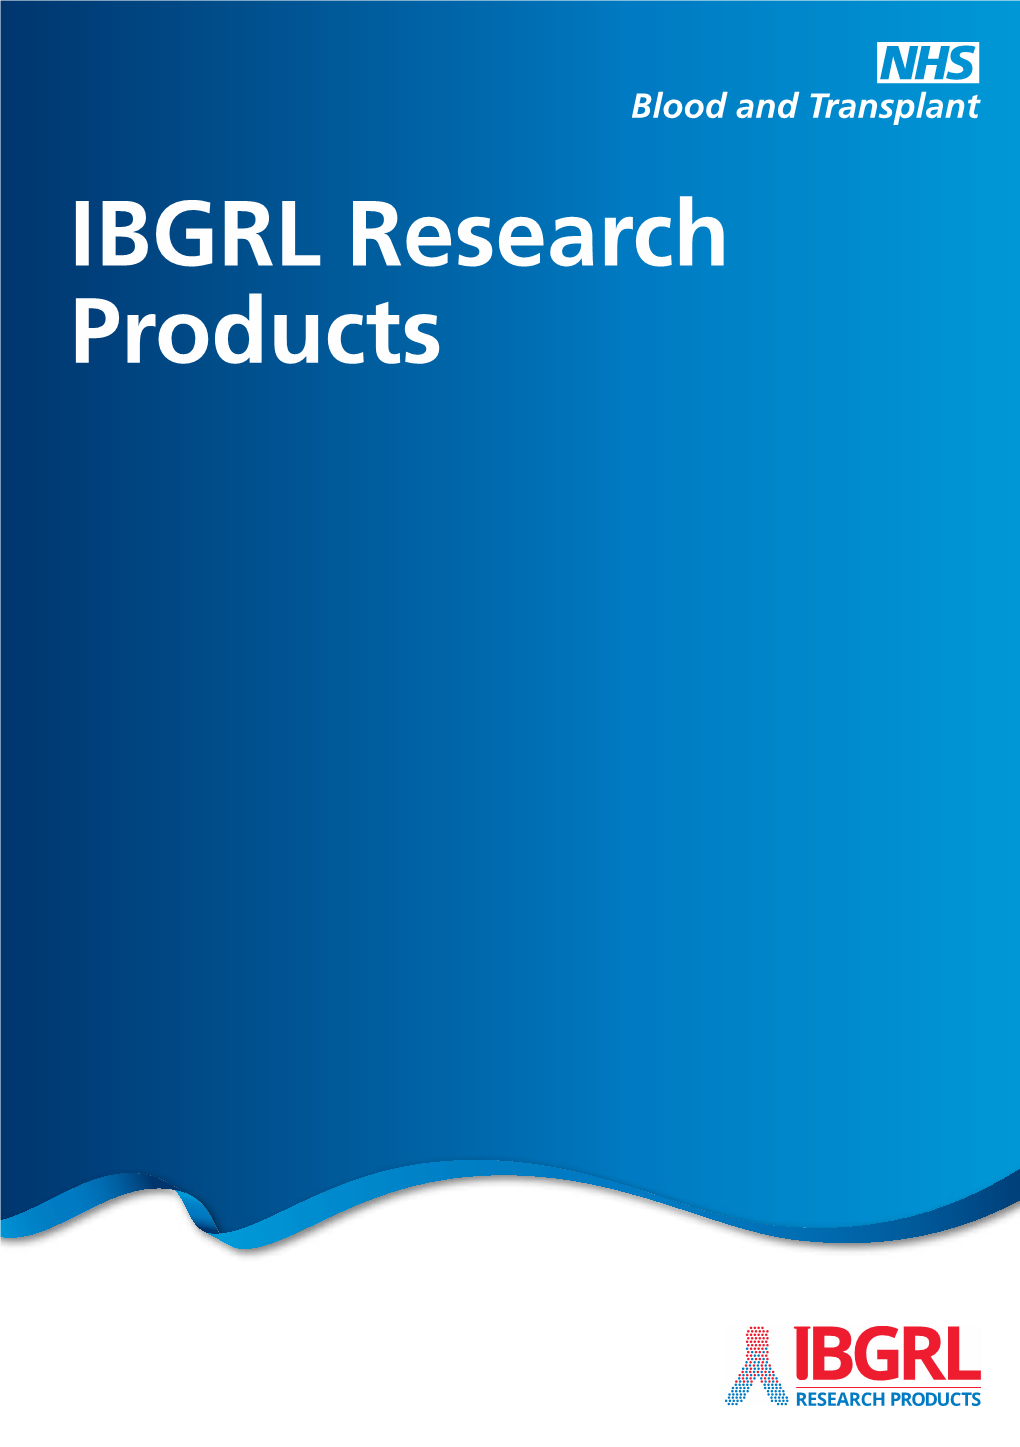 IBGRL Research Products